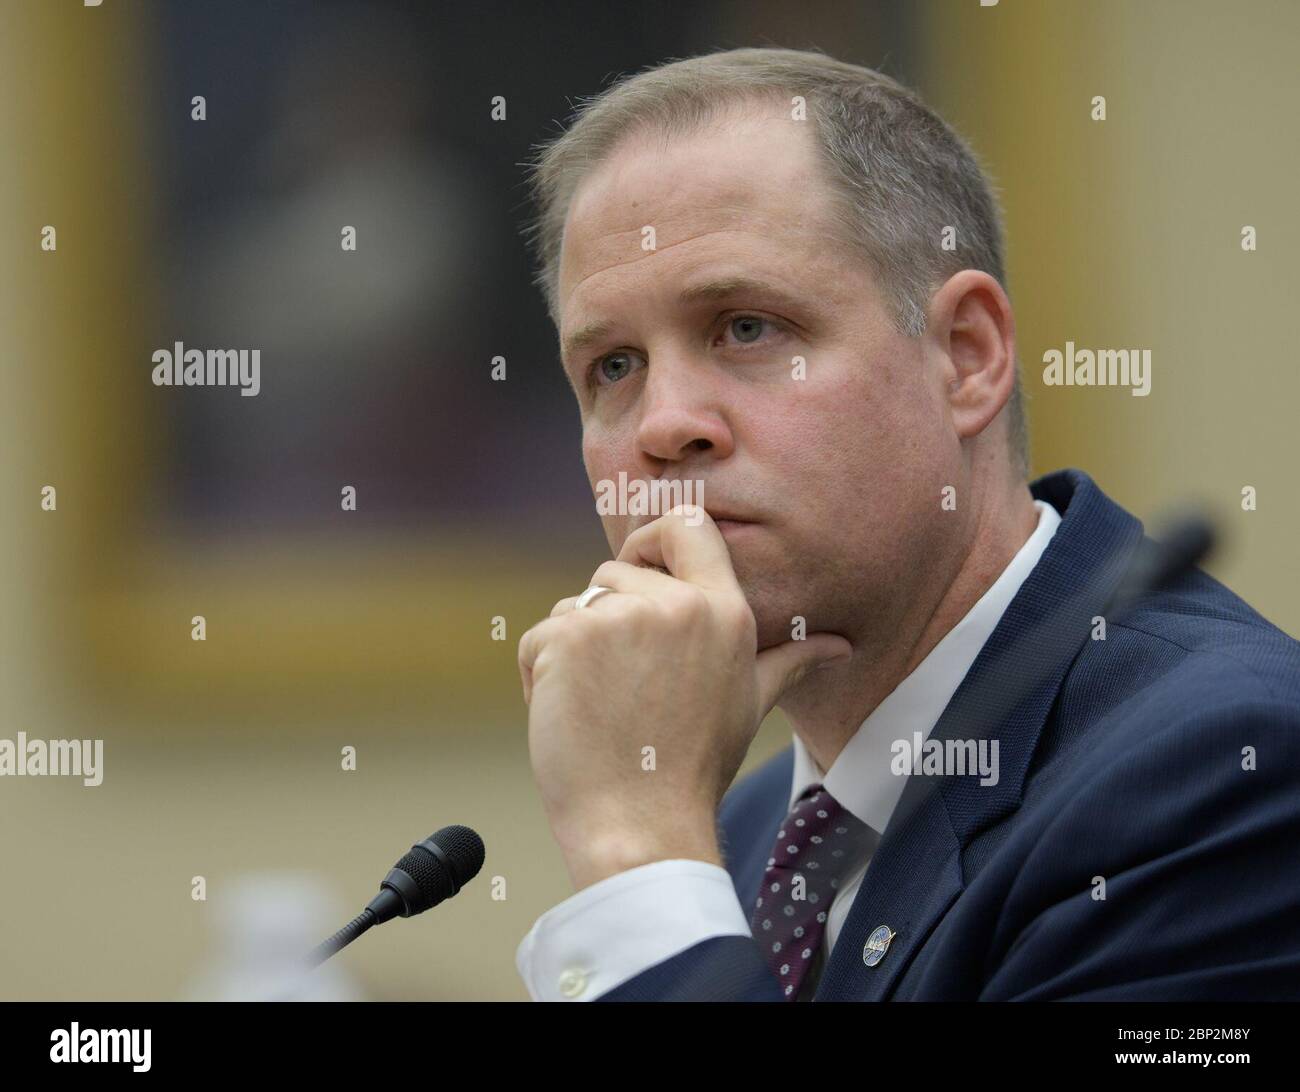 Hearing on James Webb Space Telescope  NASA Administrator Jim Bridenstine testifies before the House Committee on Science, Space, and Technology during a hearing on the James Webb Space Telescope, Wednesday, July 25, 2018 at the Rayburn House Office Building in Washington. Stock Photo